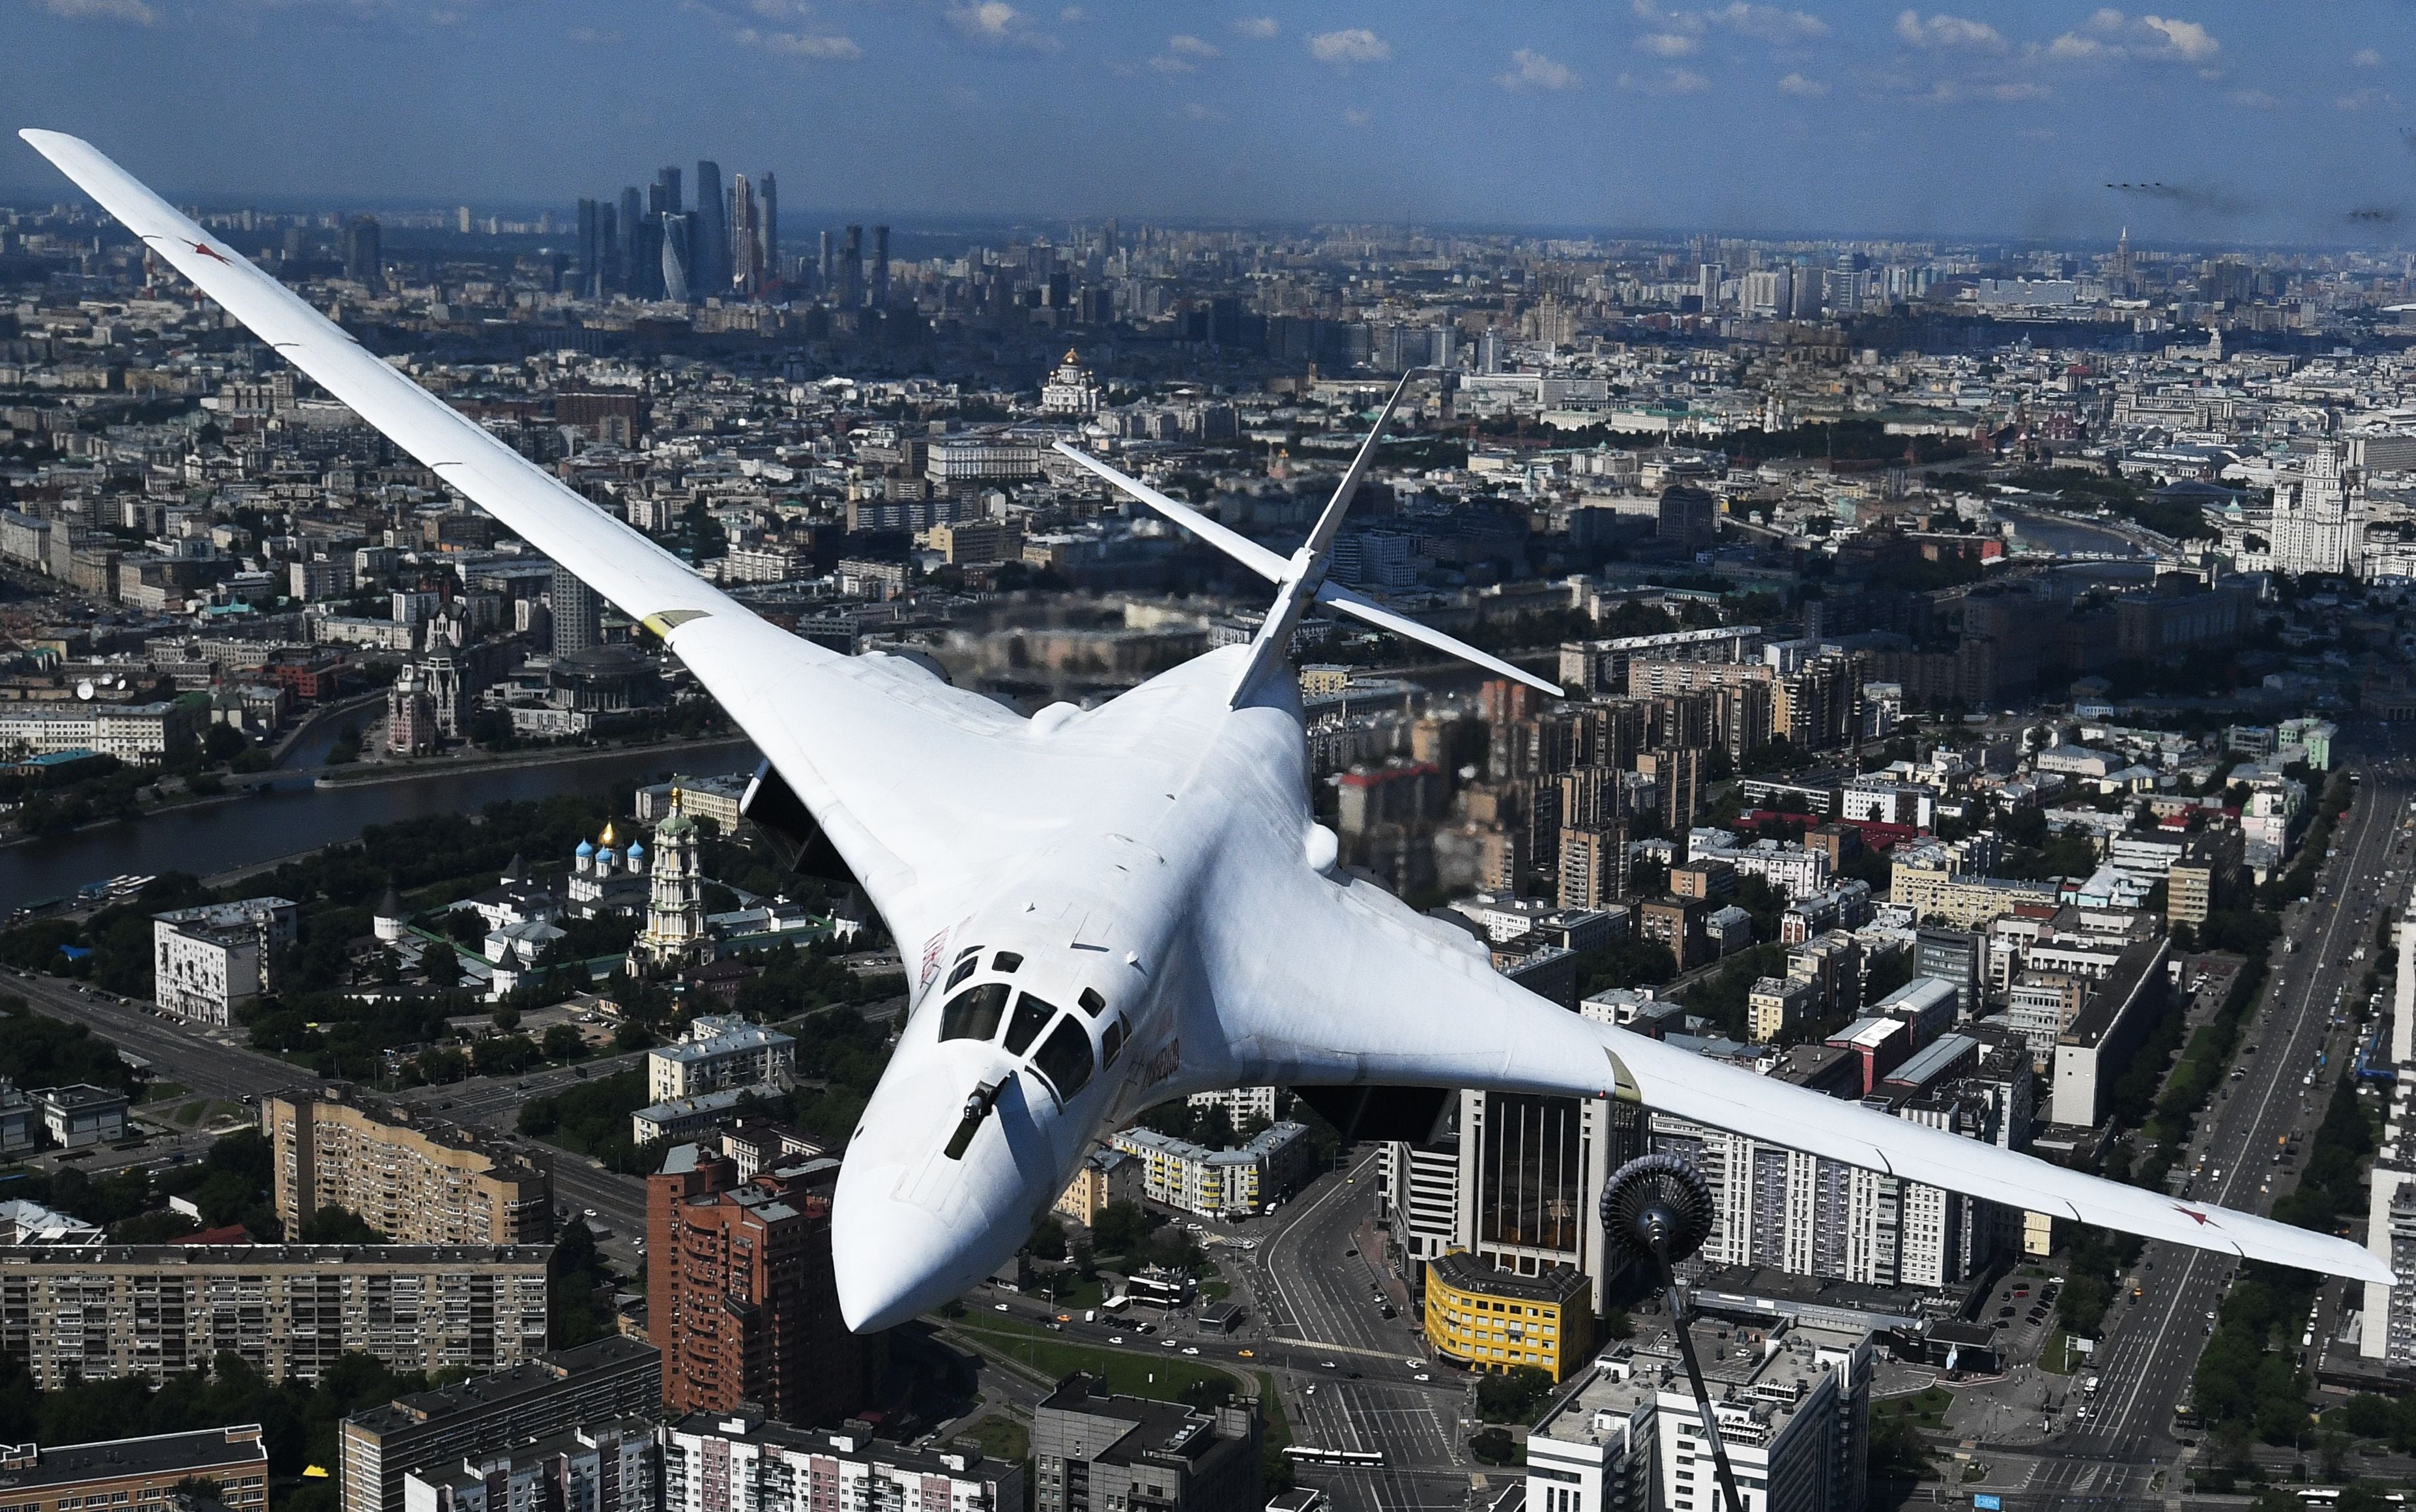 Russia's upgraded Tu-160 bomber to undergo government testing